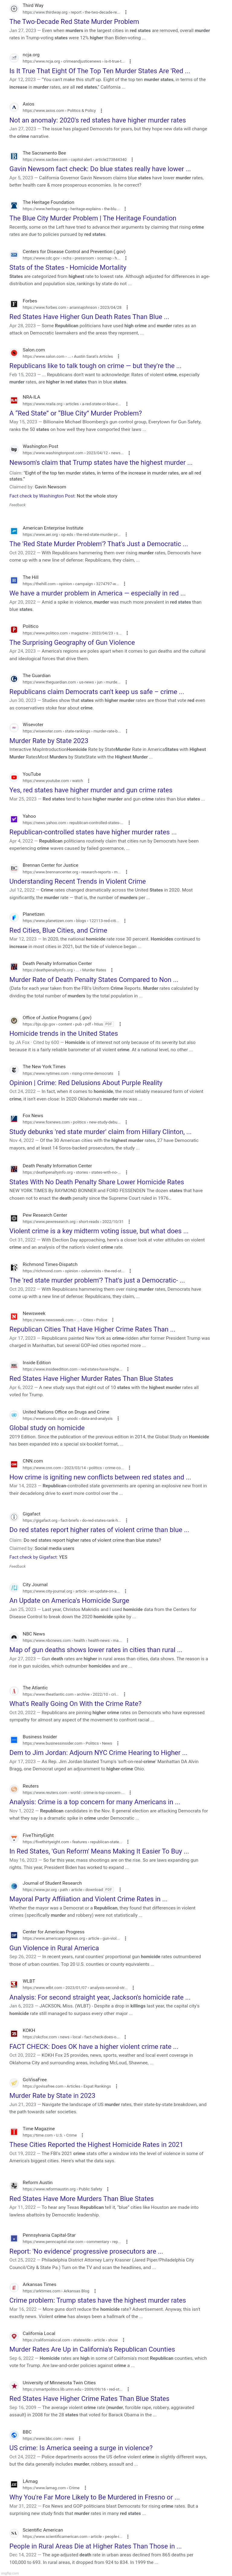 Red State murder rates | image tagged in red state murder rates,red state crime,red states,gop,articles,crime | made w/ Imgflip meme maker